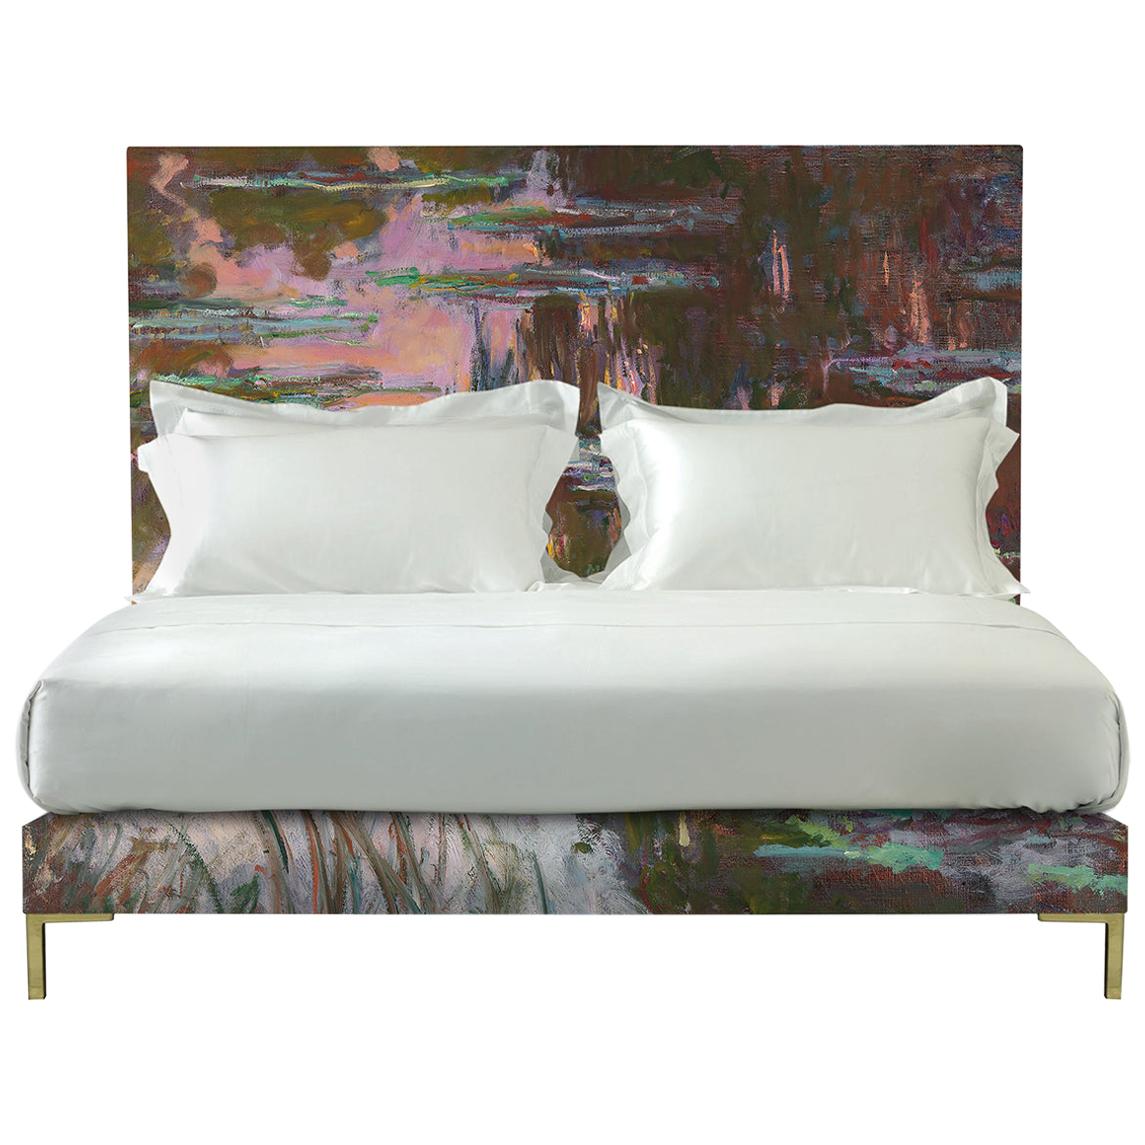 Savoir Harlech with Claude Monet’s Water-Lilies and Nº4 Bed Set, Queen Size